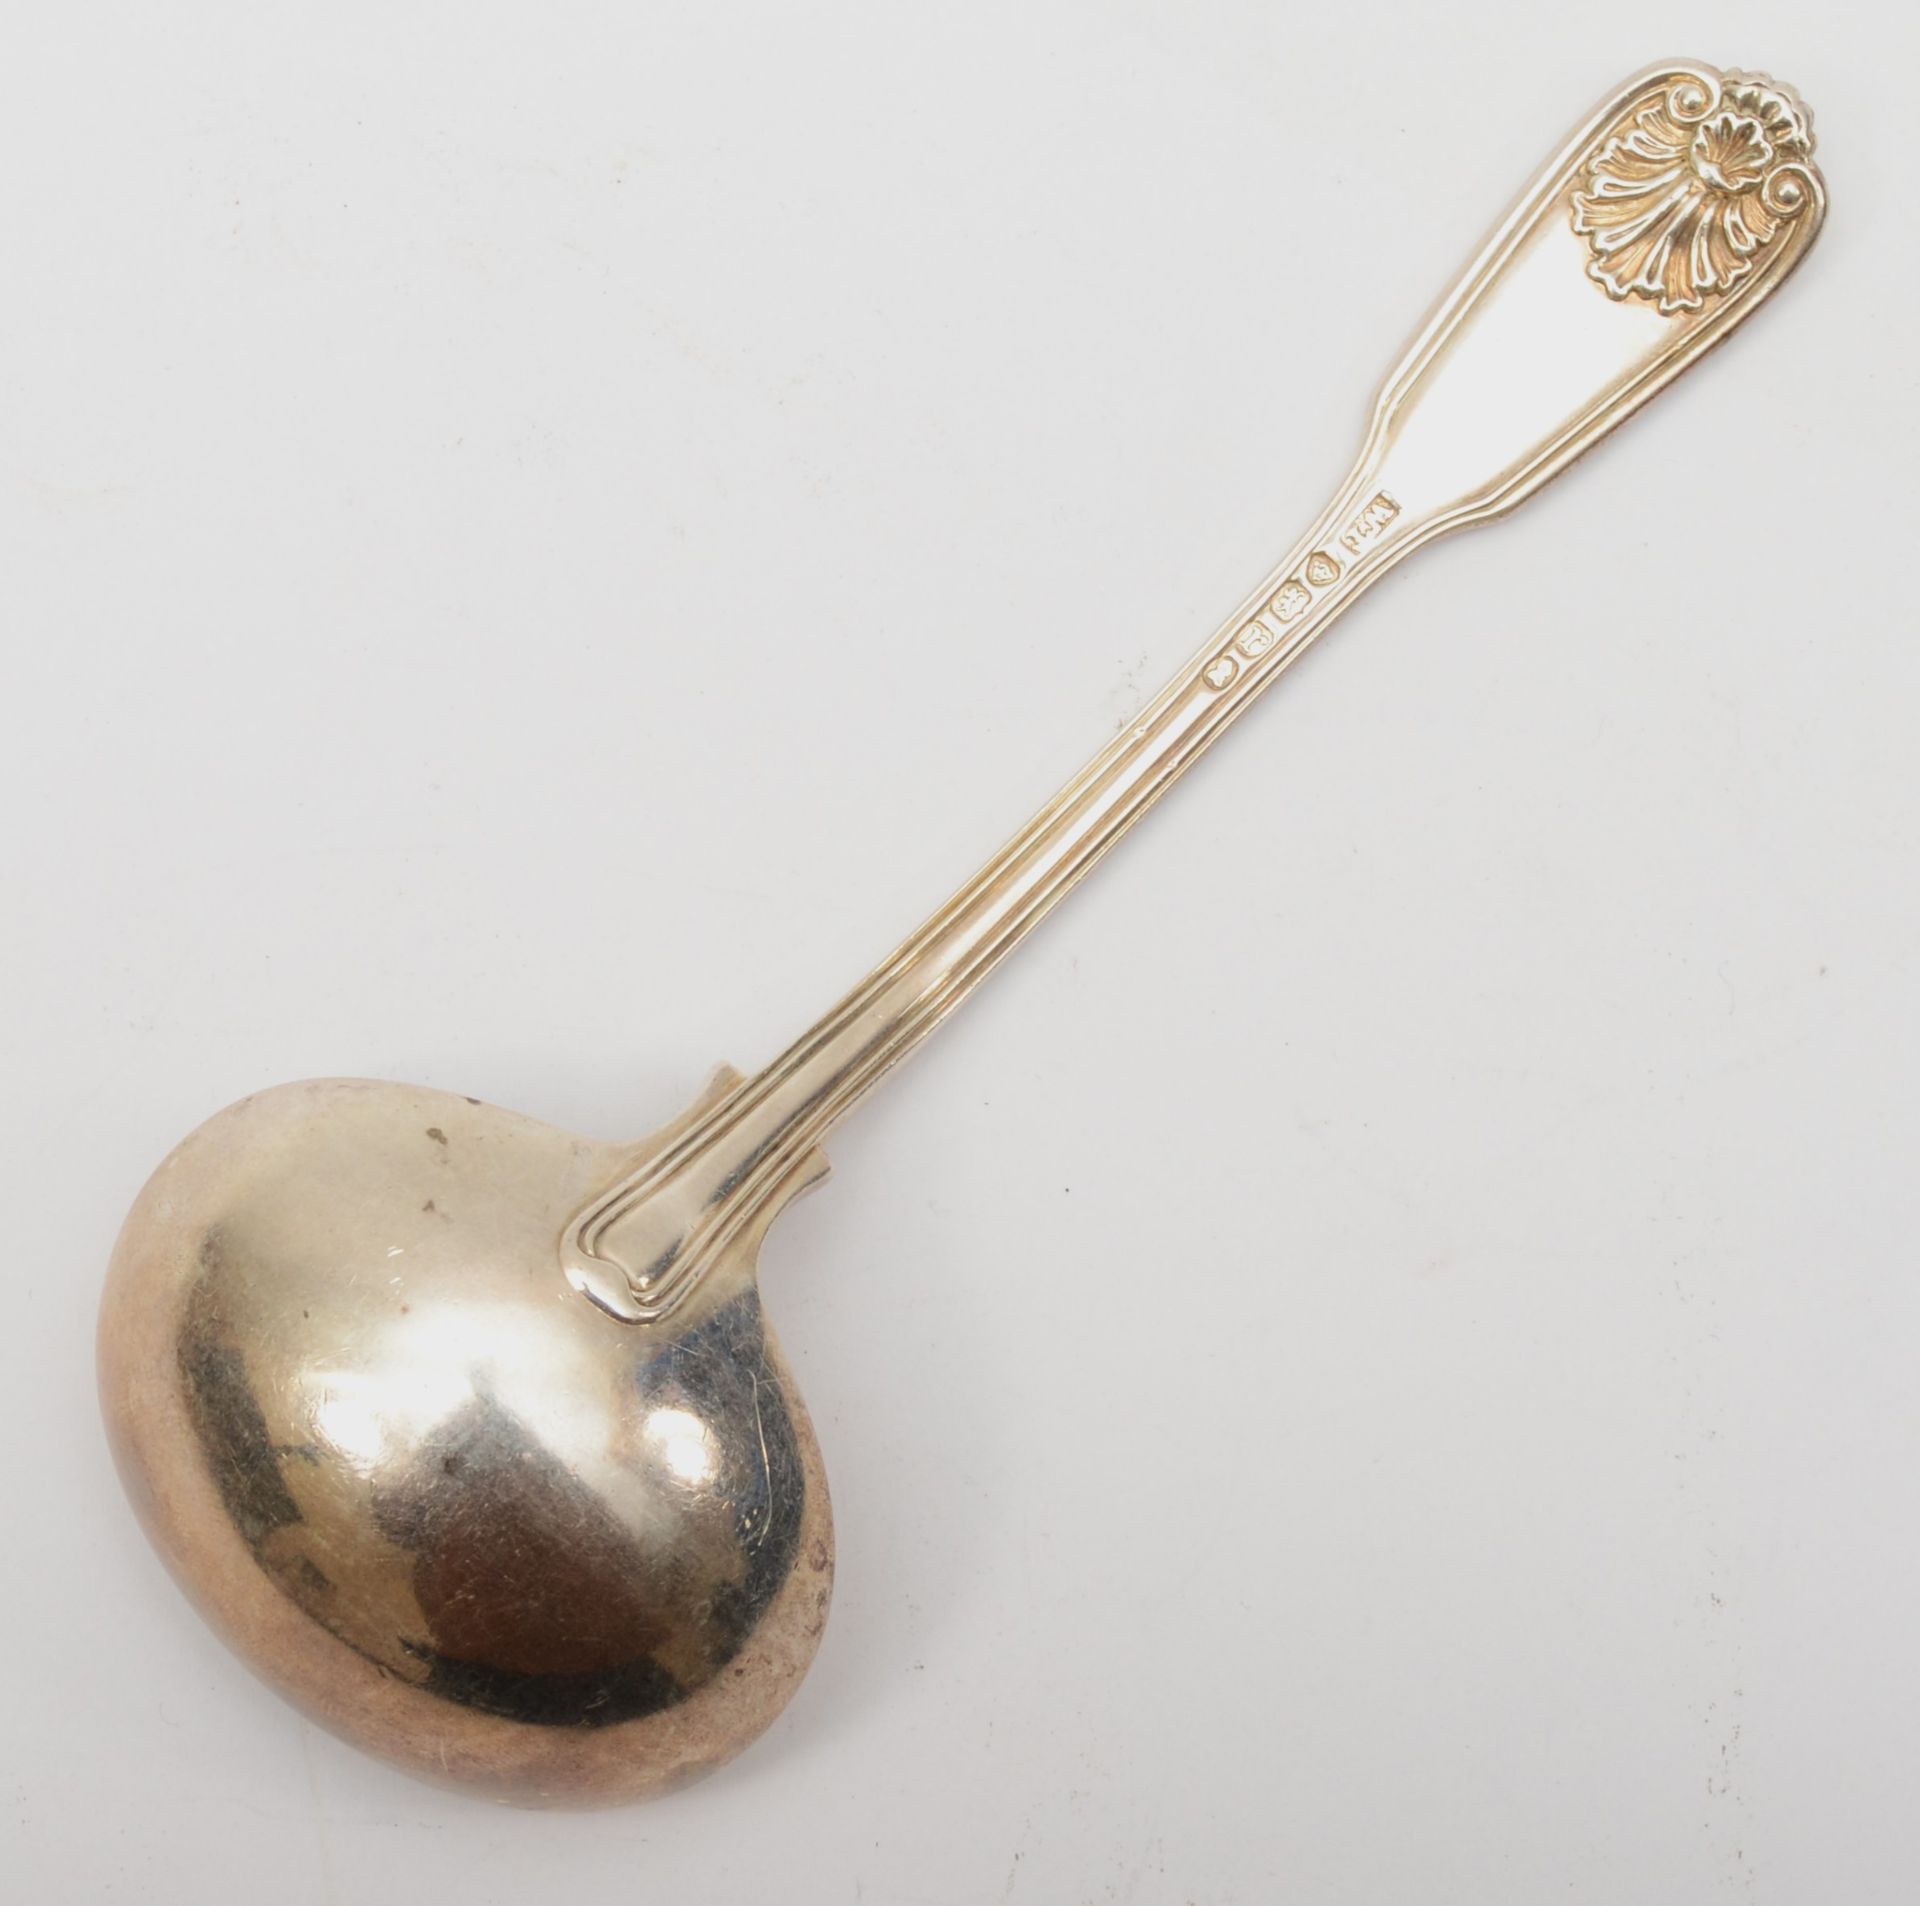 A William IV silver shell, thread and fiddle pattern sauce ladle, by William Theobalds, London 1832, - Image 2 of 2